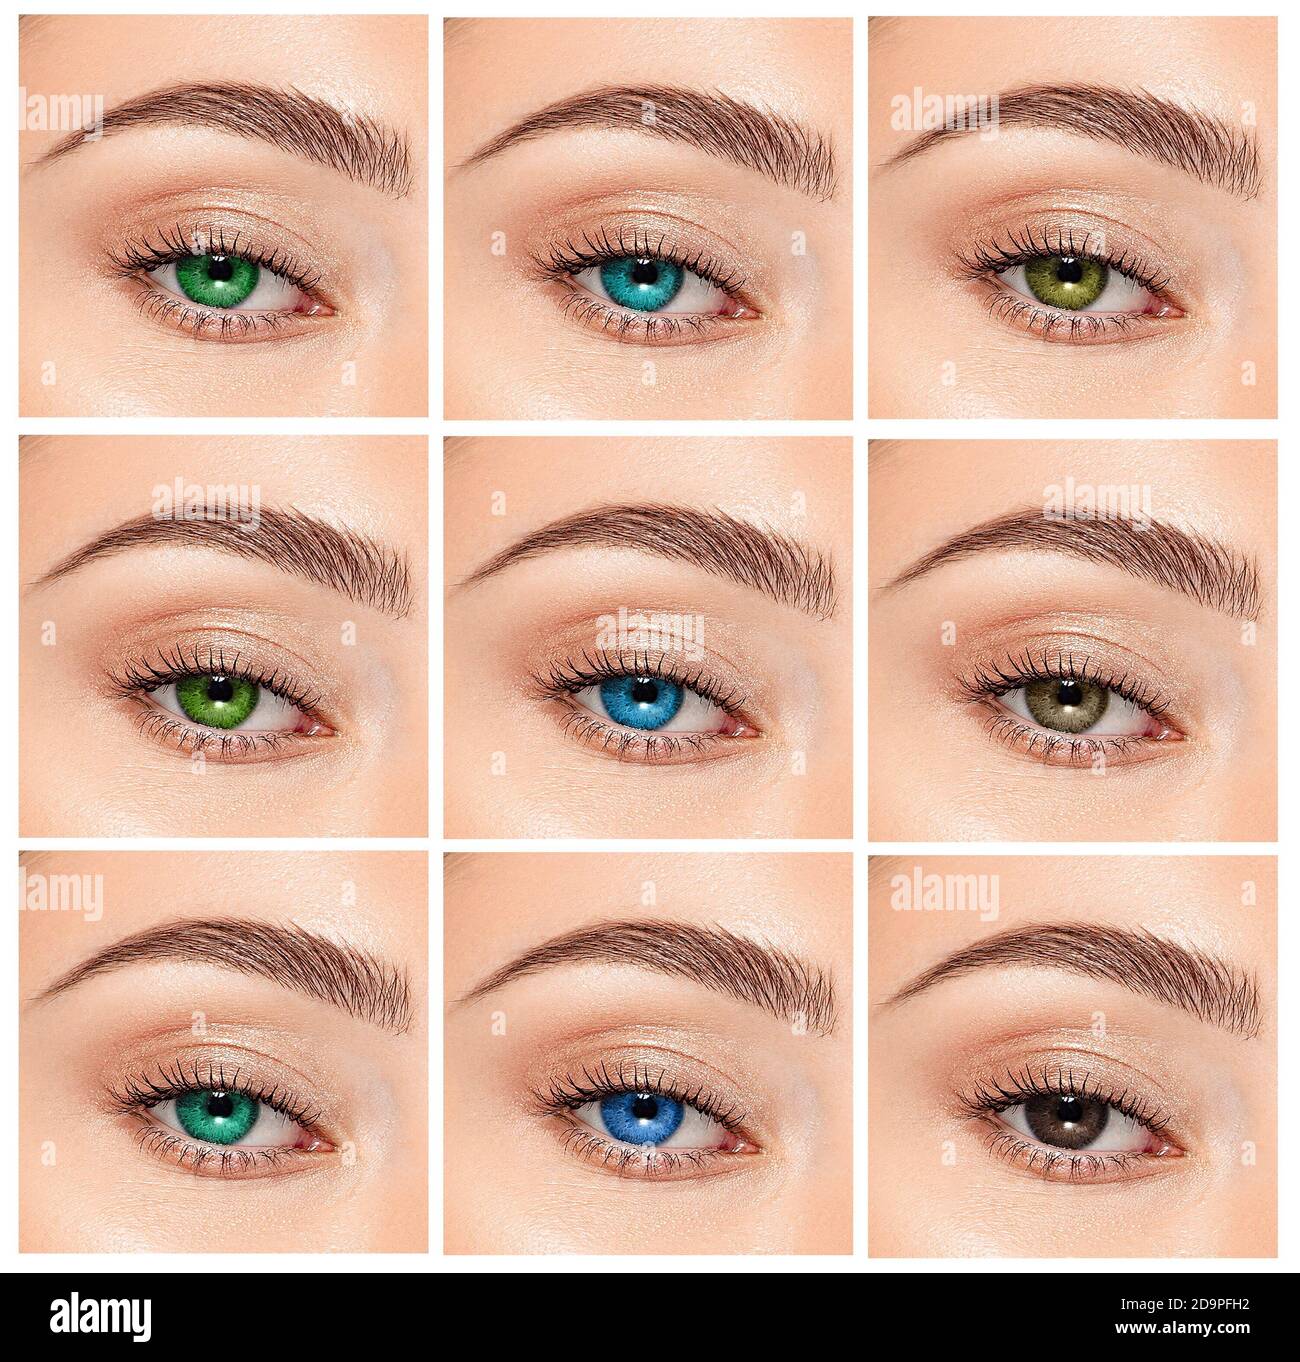 Close up, collage of eyes with different color, green, gray and blue color shade on color contact lenses on human eye Stock Photo